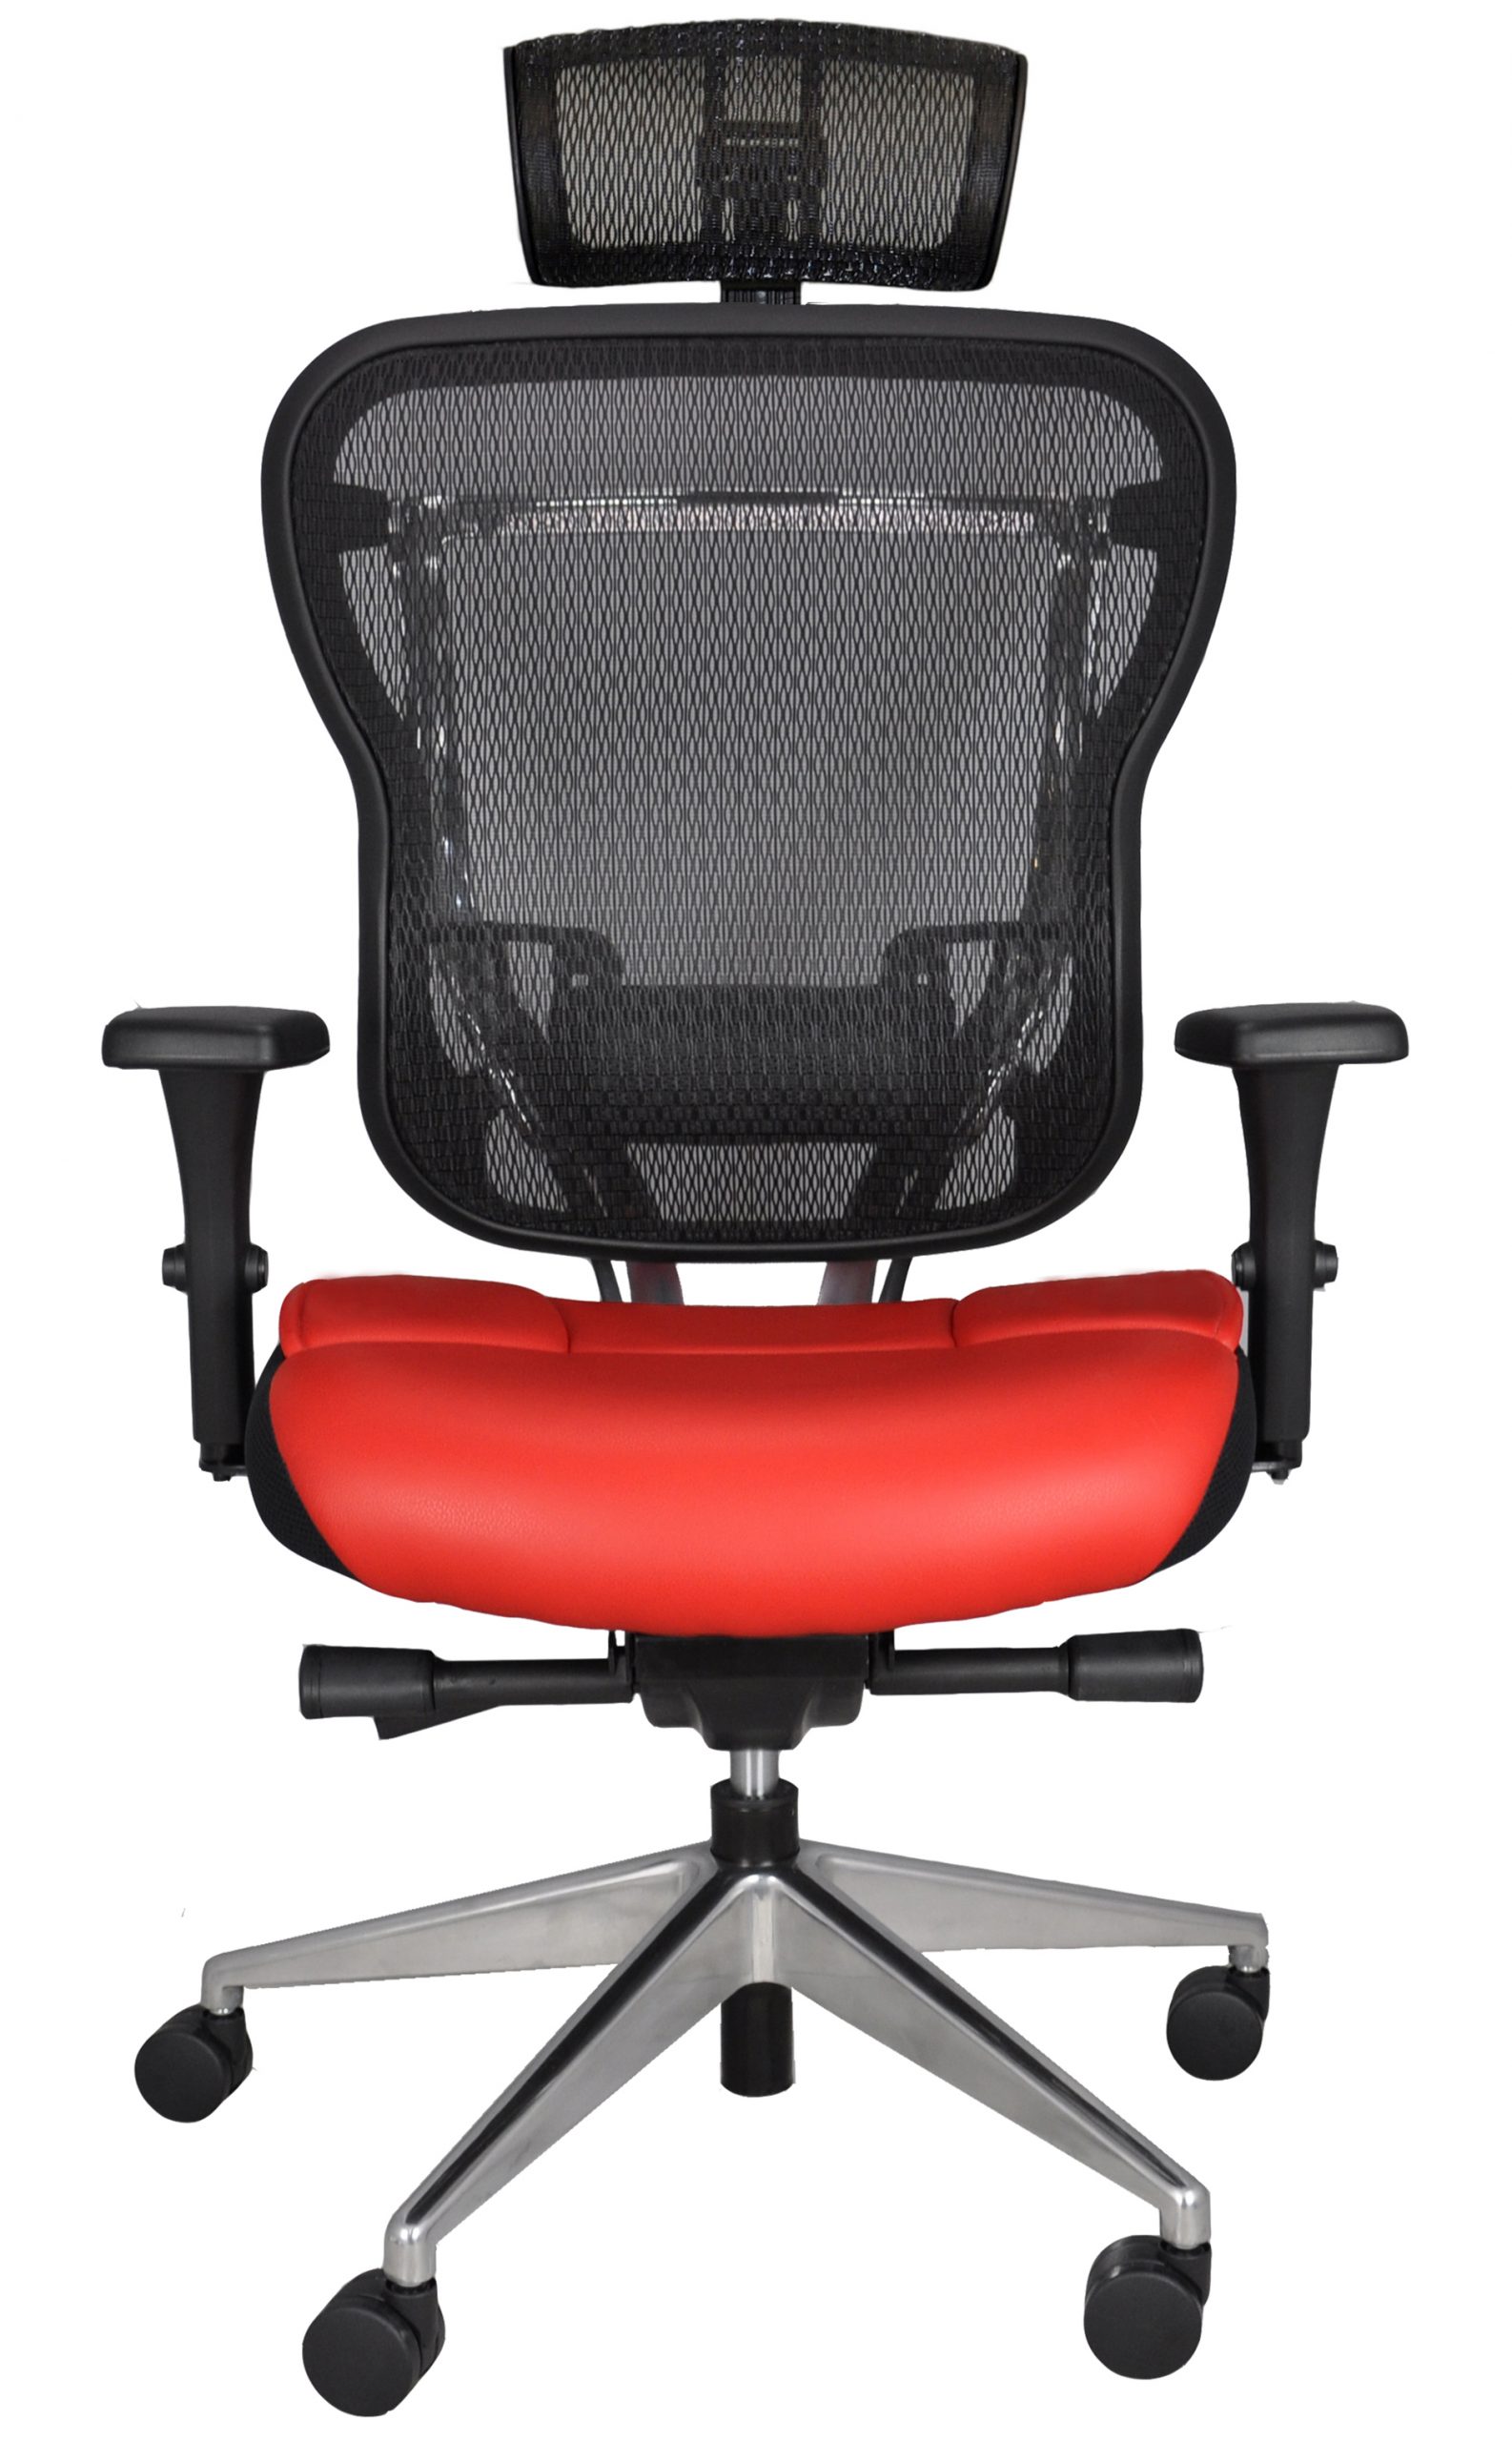 Mesh task chair with headrest and leather seat